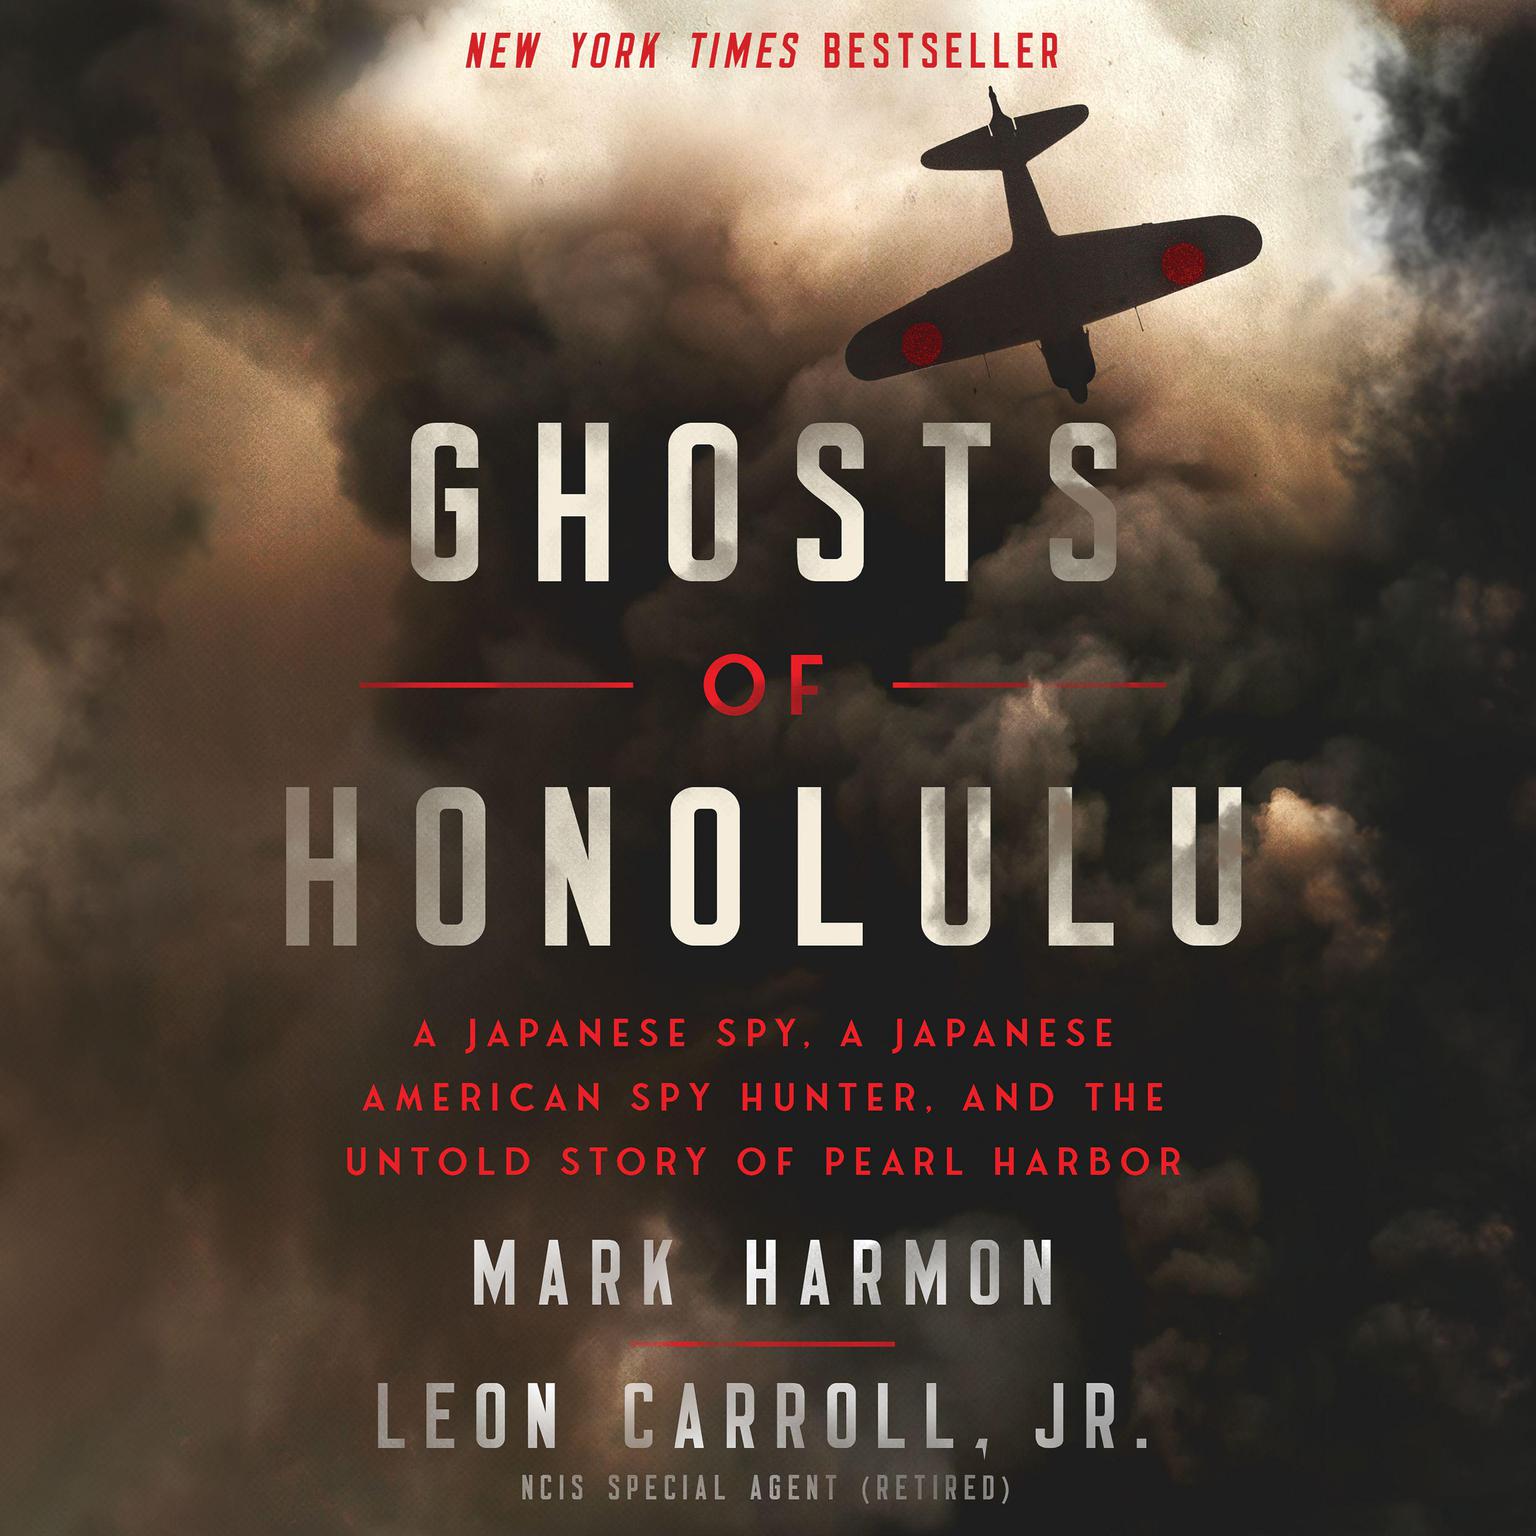 Ghosts of Honolulu: A Japanese Spy, a Japanese American Spy Hunter, and the Untold Story of Pearl Harbor Audiobook, by Mark Harmon